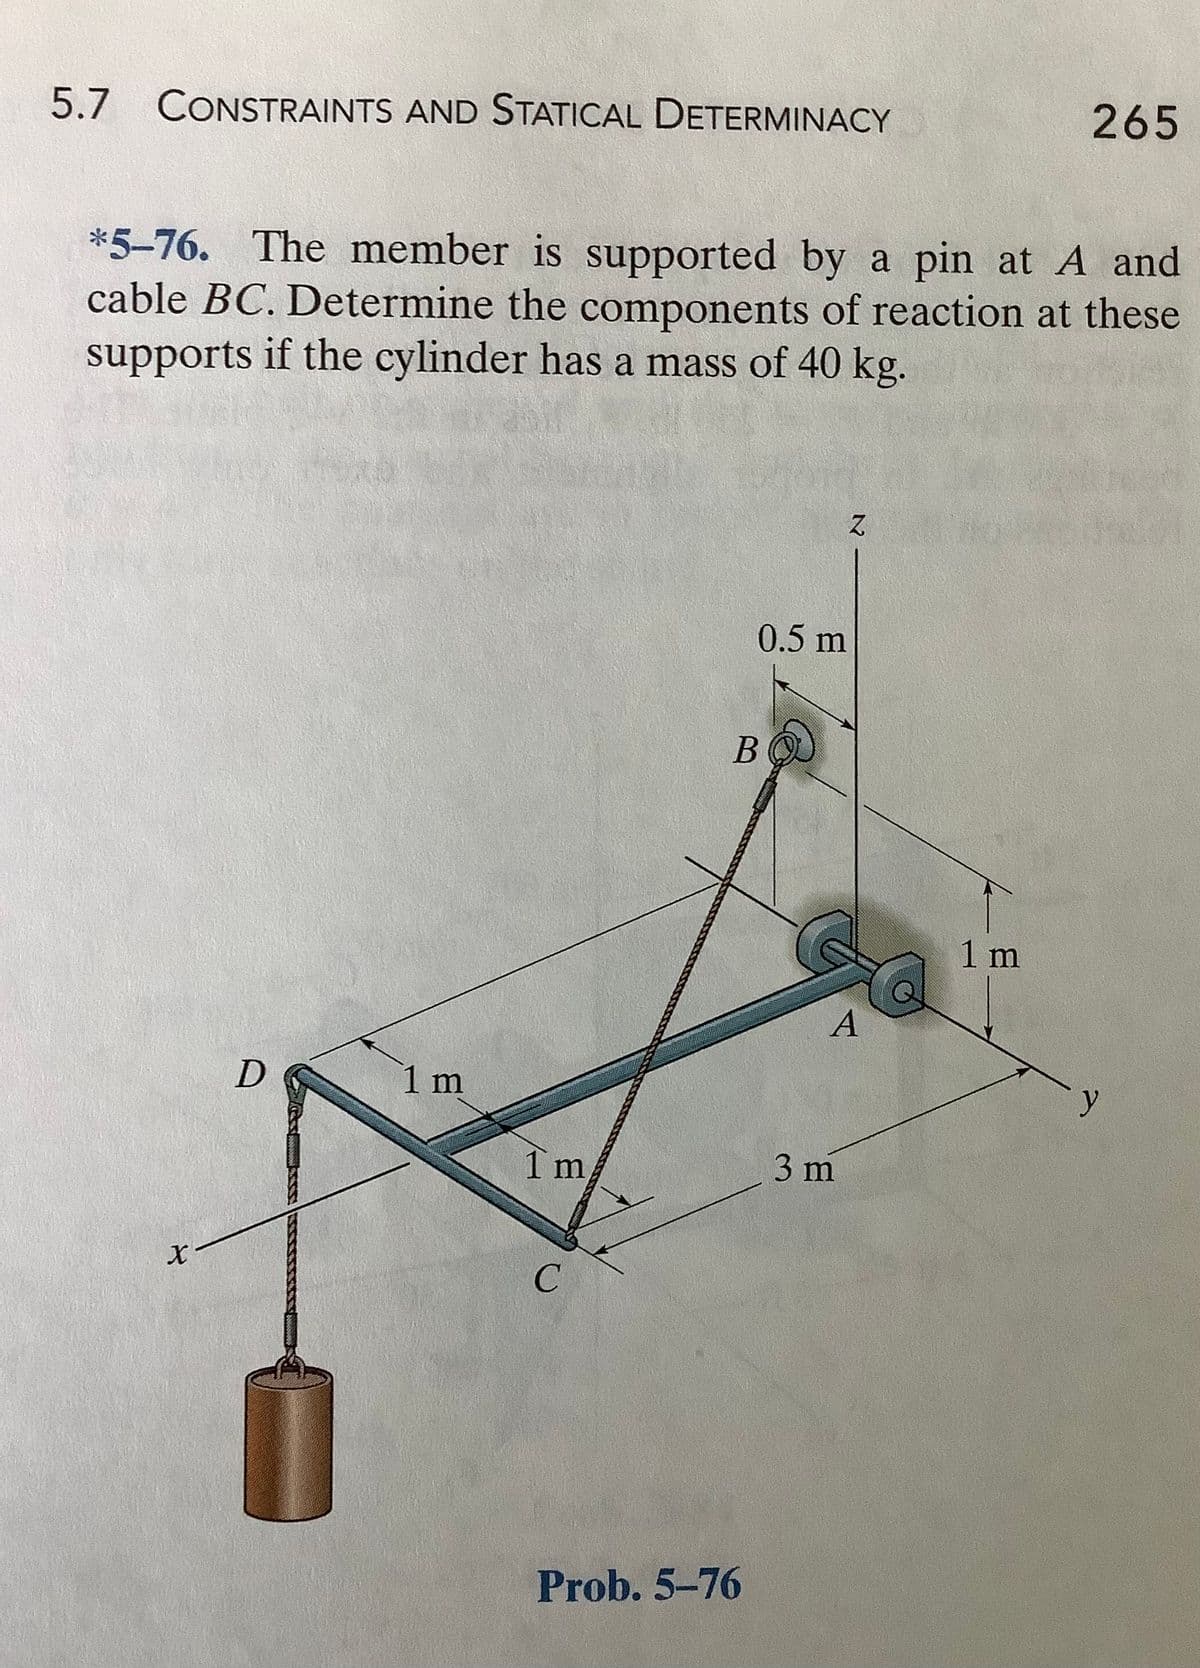 265
5.7 CONSTRAINTS AND STATICAL DETERMINACY
*5-76. The member is supported by a pin at A and
cable BC. Determine the components of reaction at these
supports if the cylinder has a mass of 40 kg.
0.5 m
В
1 m
A
1 m
y
1 m
3 m
Prob. 5-76
